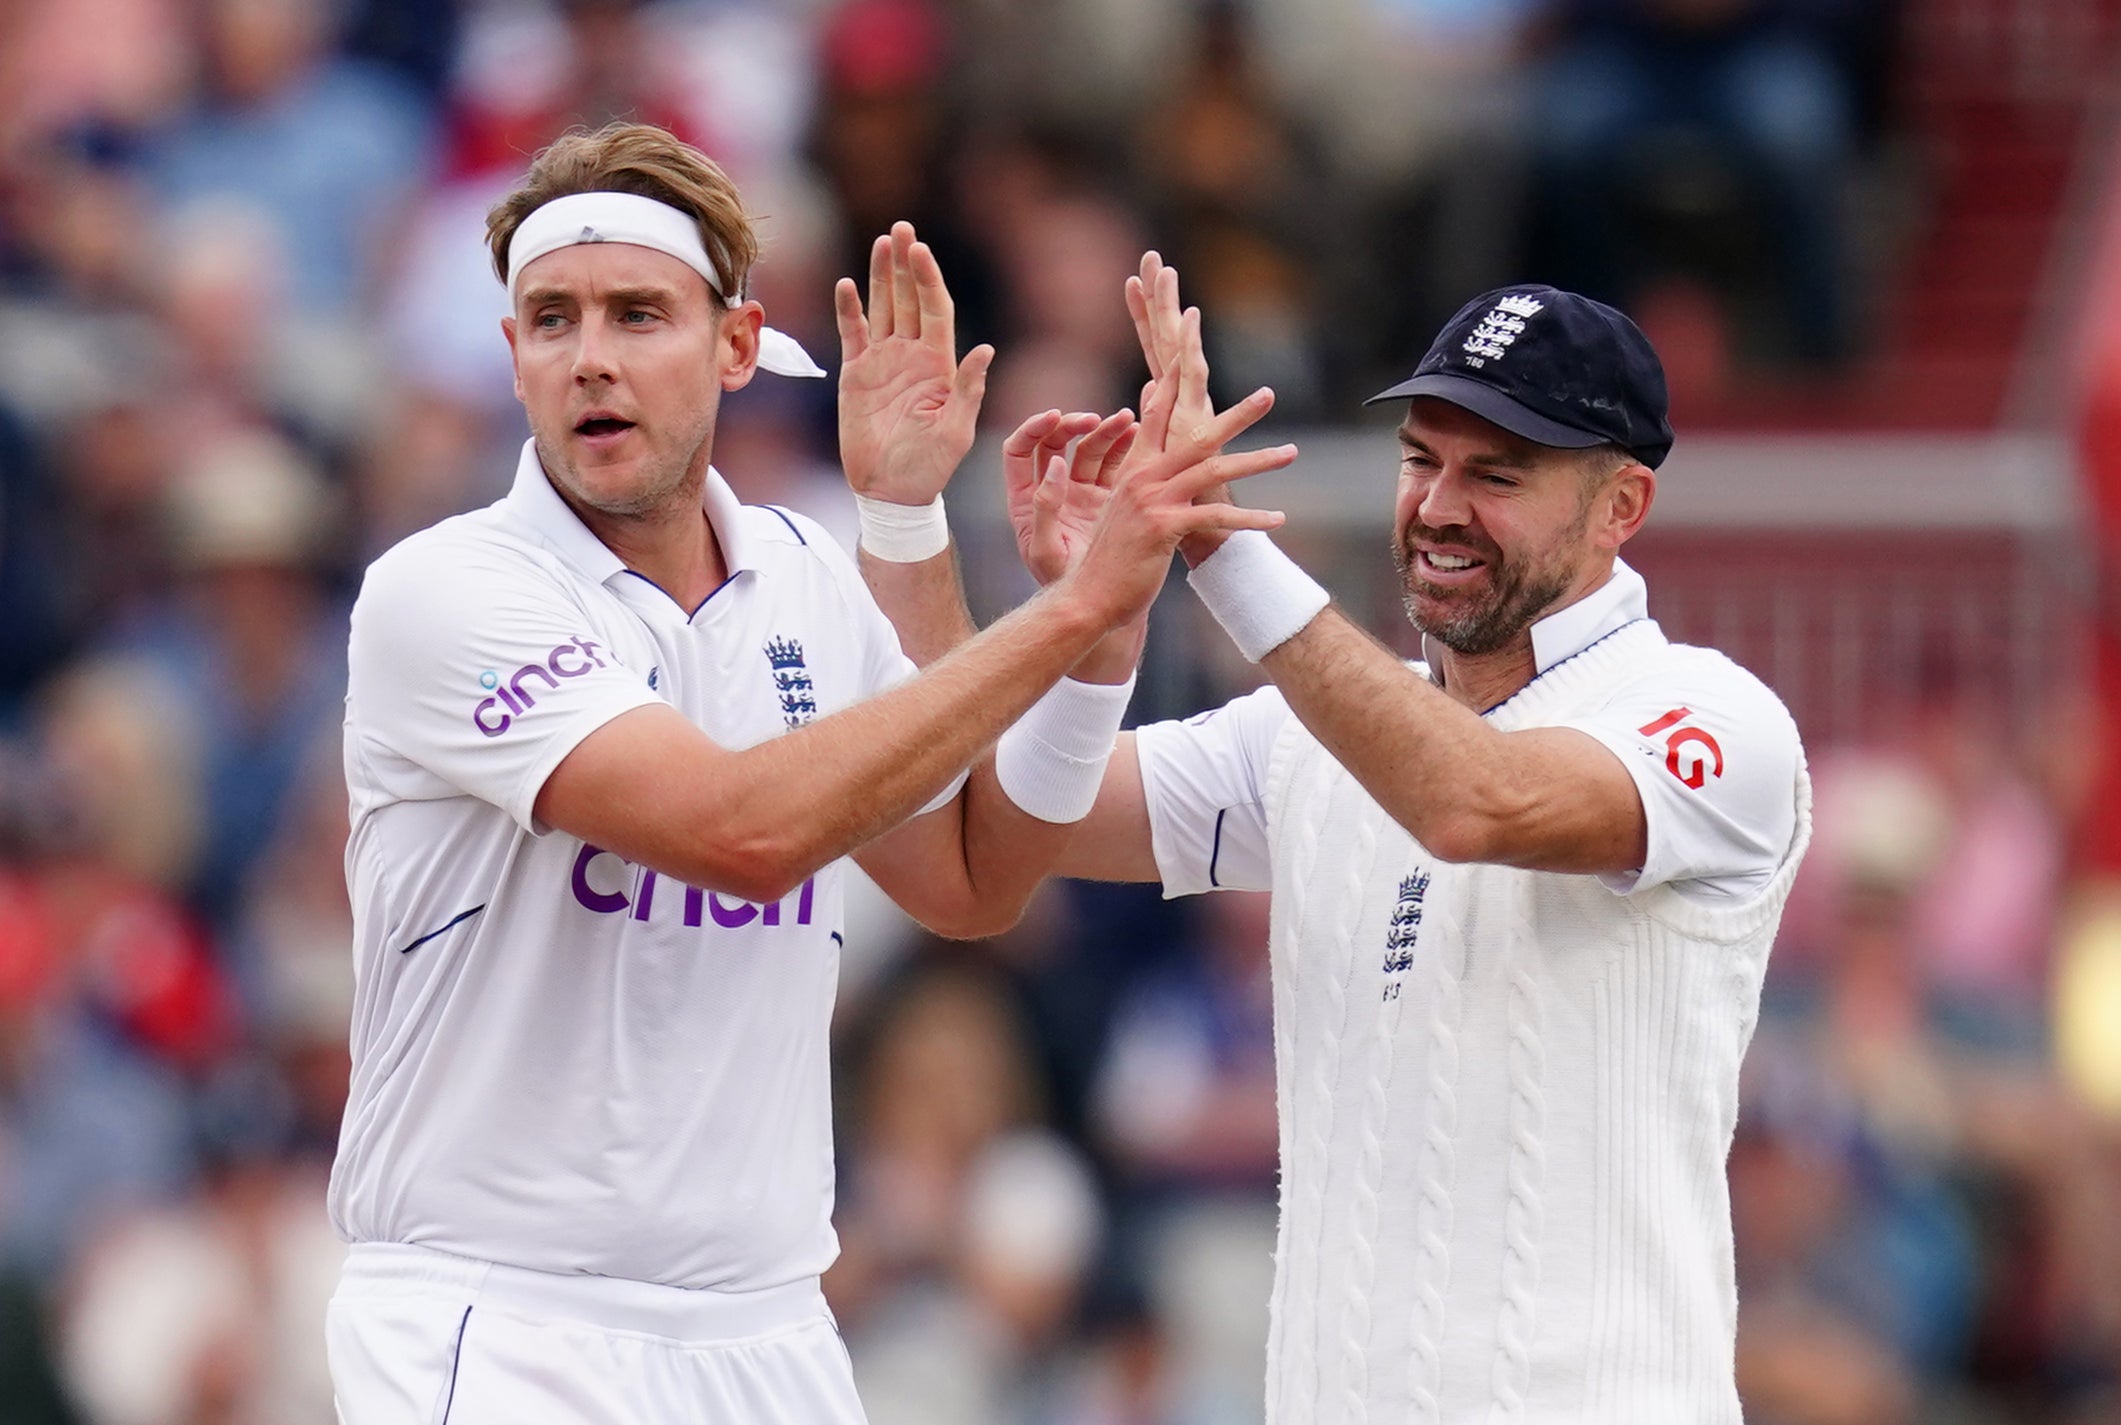 Stuart Broad and James Anderson celebrate after England’s successful morning session